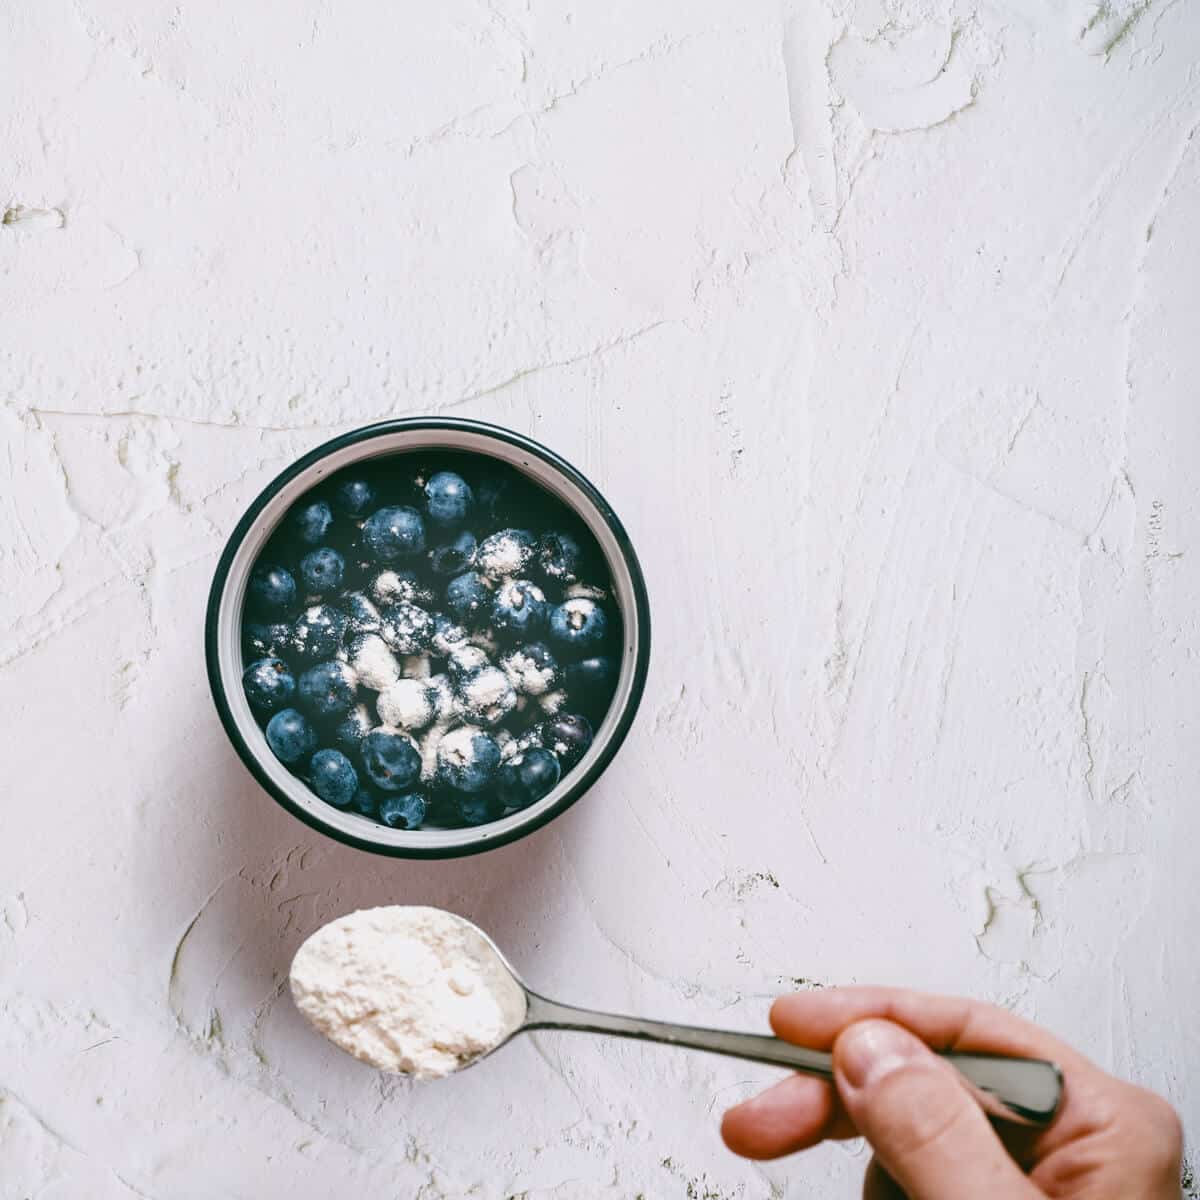 a hand spooning flour over blueberries in a bowl.